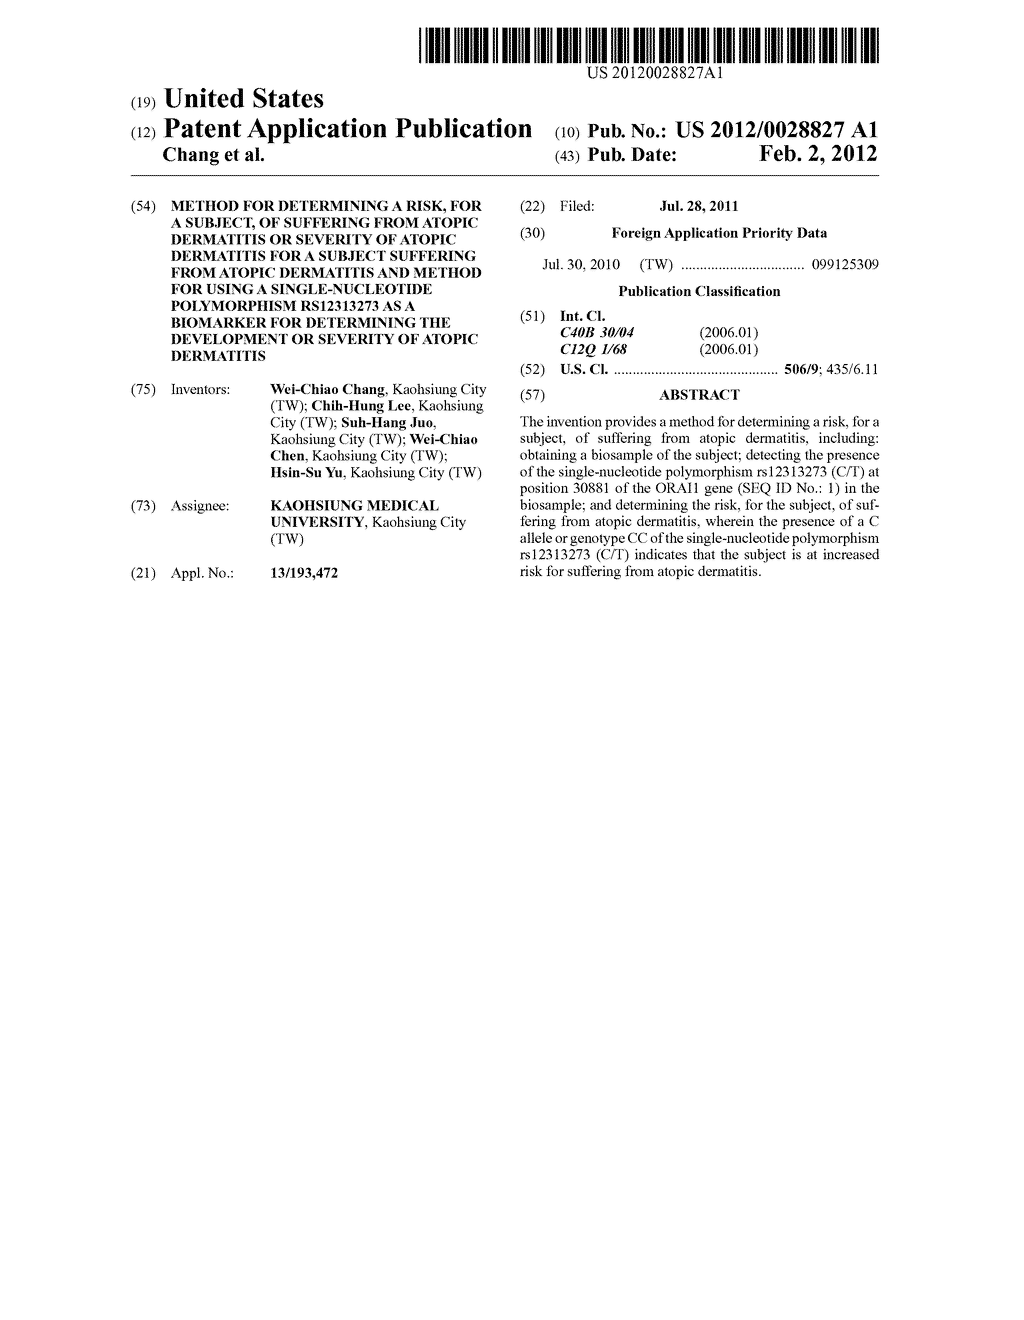 METHOD FOR DETERMINING A RISK, FOR A SUBJECT, OF SUFFERING FROM ATOPIC     DERMATITIS OR SEVERITY OF ATOPIC DERMATITIS FOR A SUBJECT SUFFERING FROM     ATOPIC DERMATITIS AND METHOD FOR USING A SINGLE-NUCLEOTIDE POLYMORPHISM     RS12313273 AS A BIOMARKER FOR DETERMINING THE DEVELOPMENT OR SEVERITY OF     ATOPIC DERMATITIS - diagram, schematic, and image 01